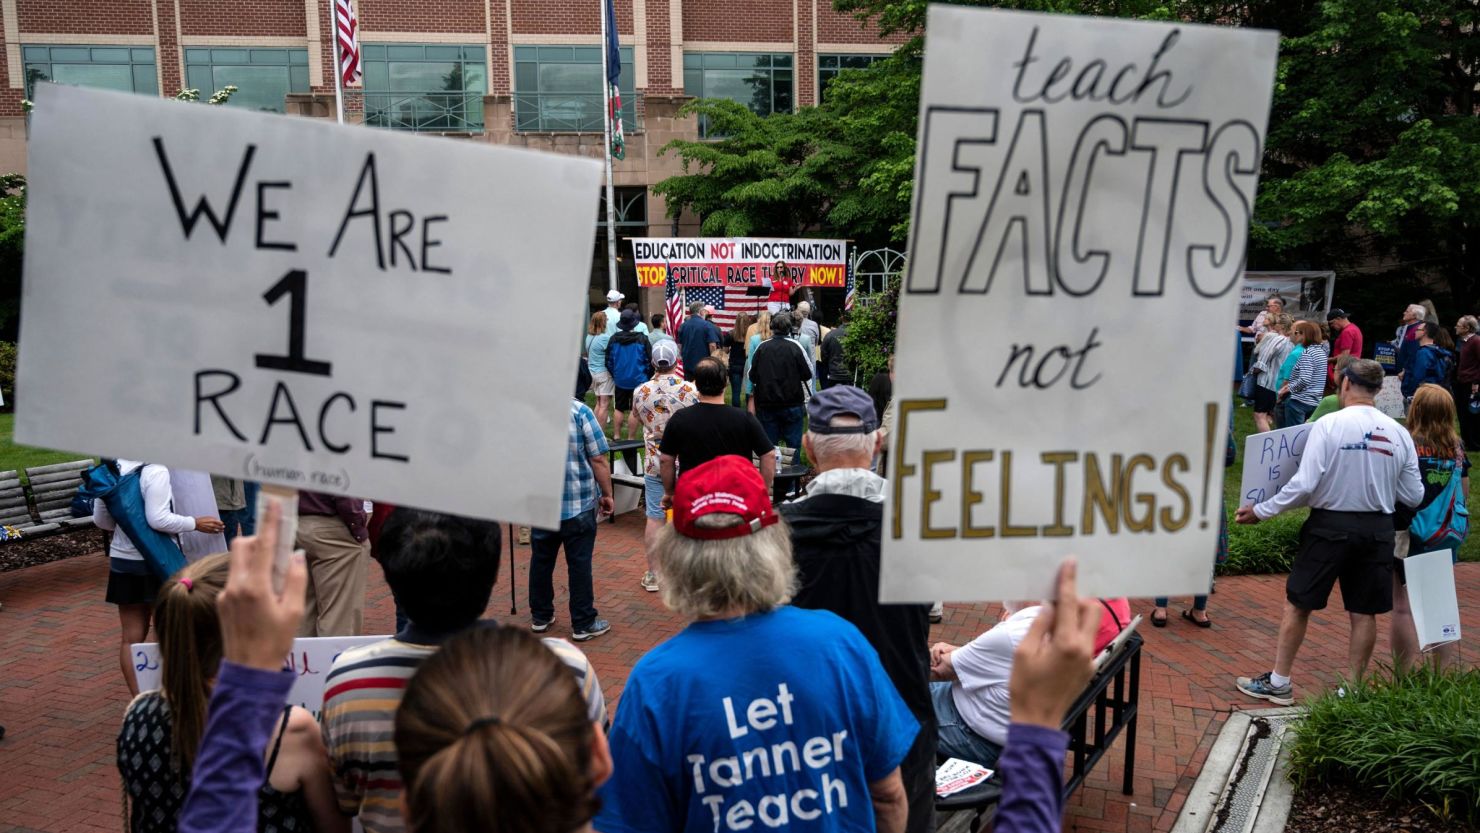 People attend a rally against critical race theory being taught in Loudoun County schools on June 12, 2021, in Leesburg, Virginia.